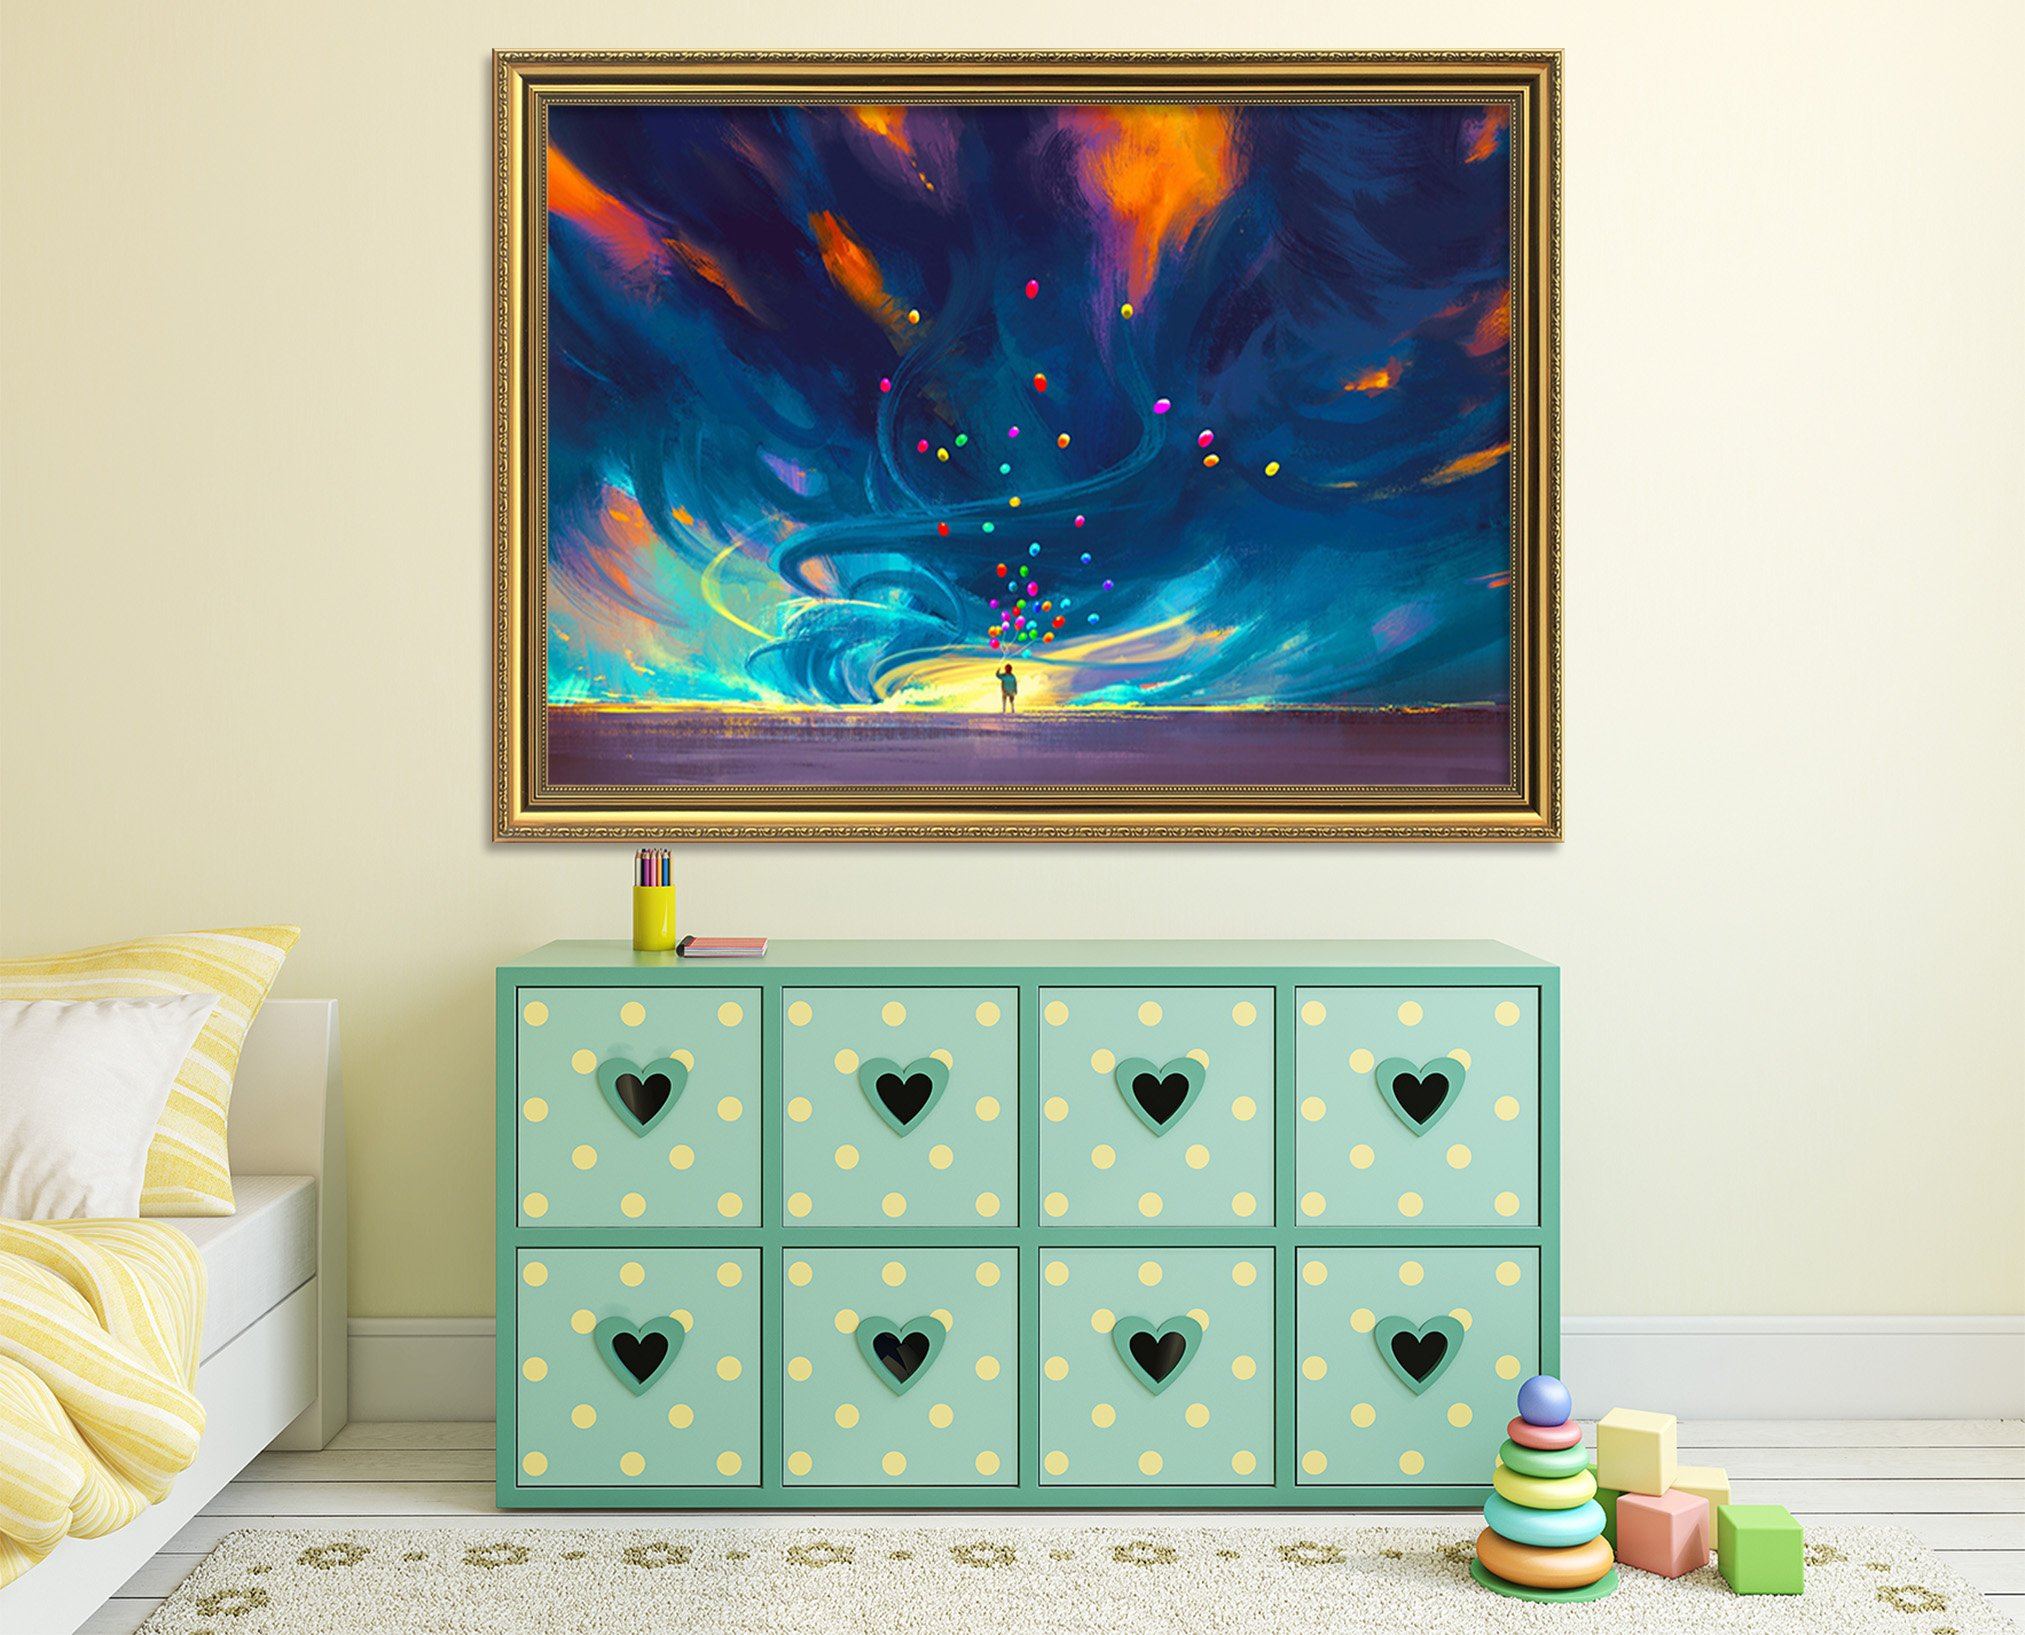 3D Colorful Balloons 183 Fake Framed Print Painting Wallpaper AJ Creativity Home 